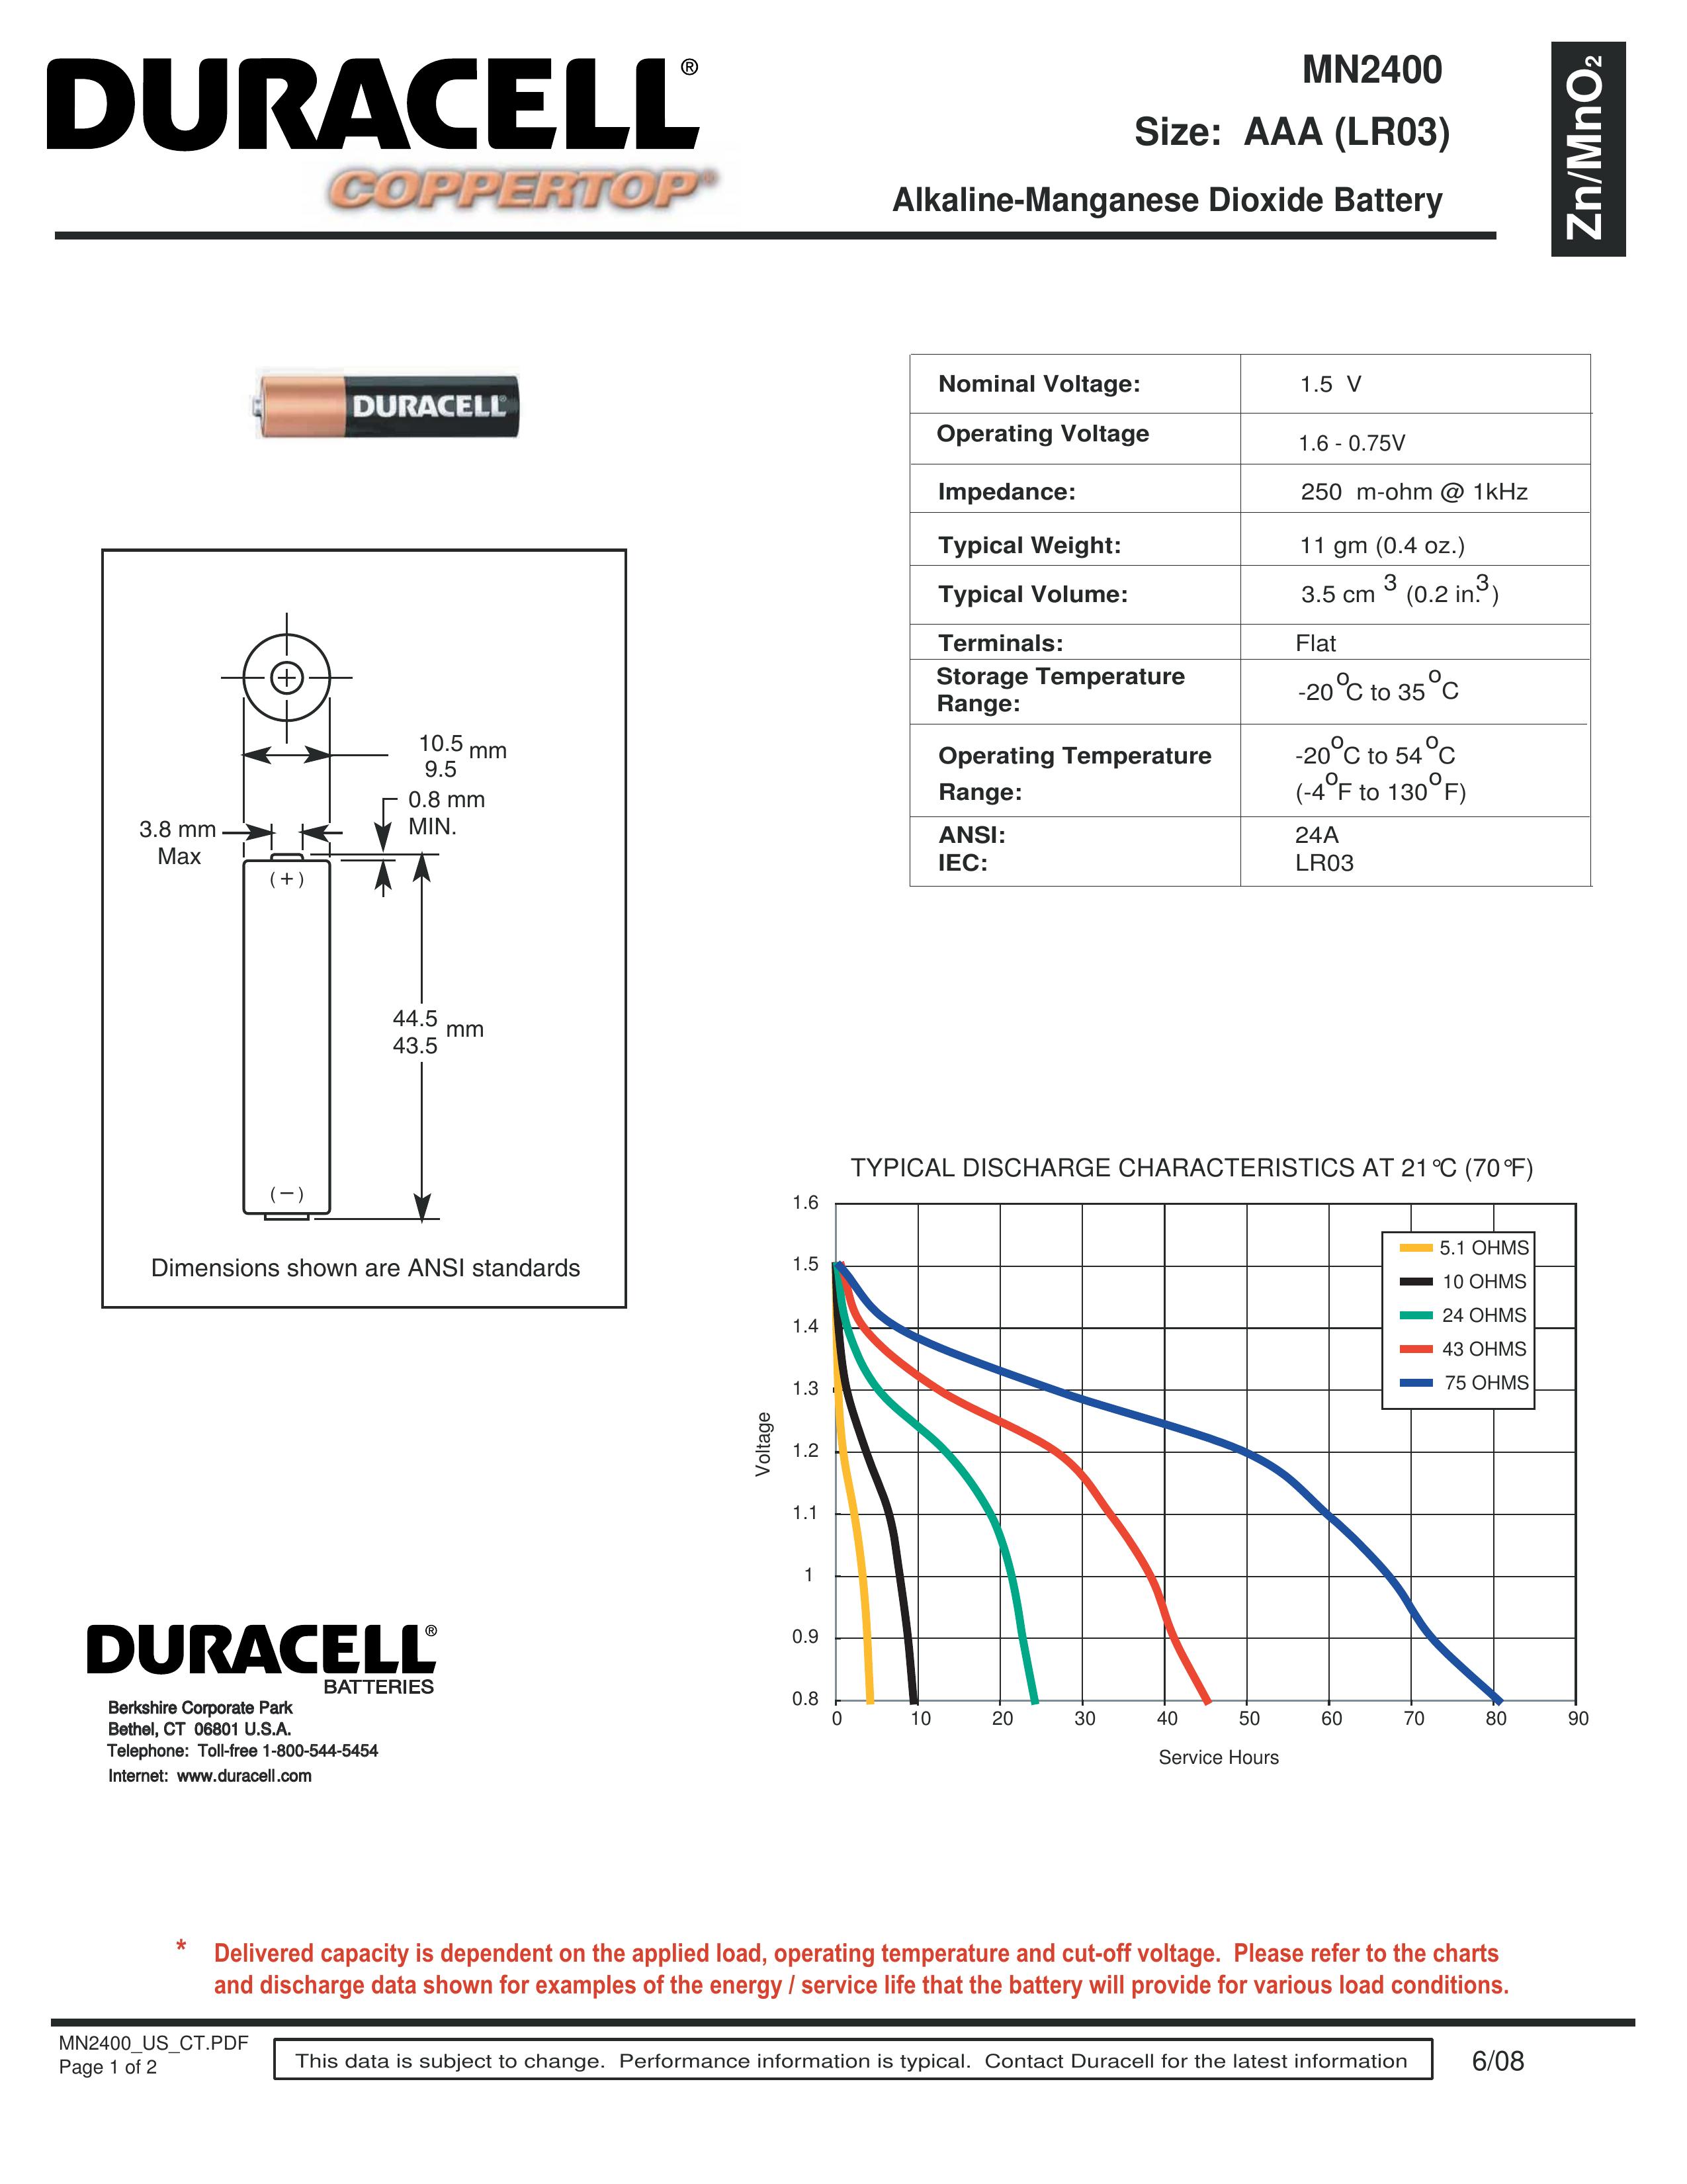 Duracell MN2400 Camera Accessories User Manual